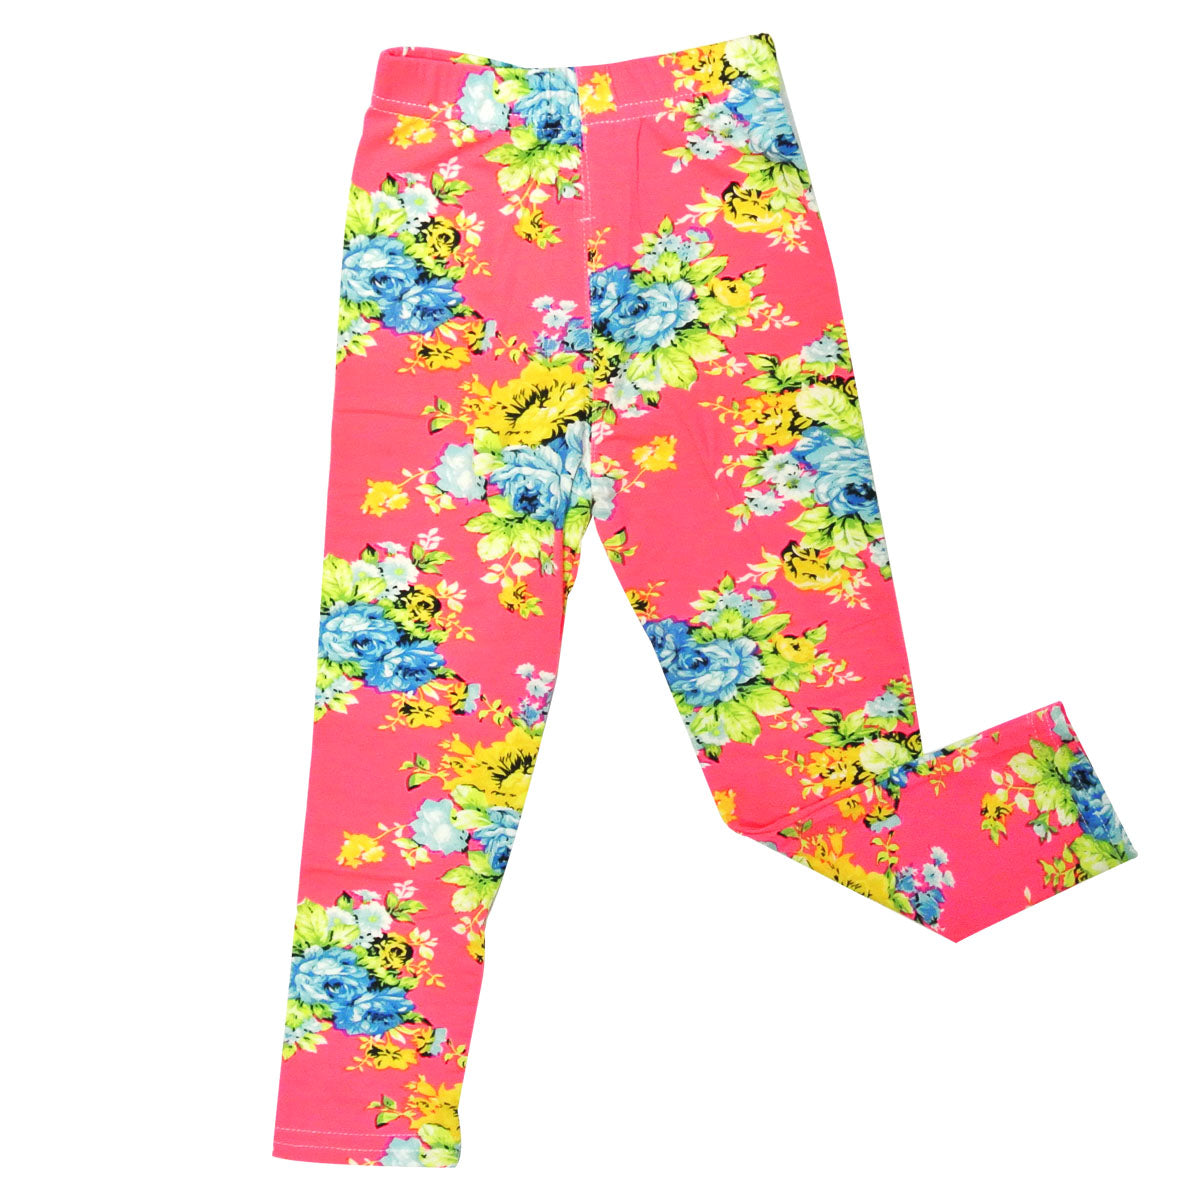 Wrapables Toddler Blooming Floral Print Leggings